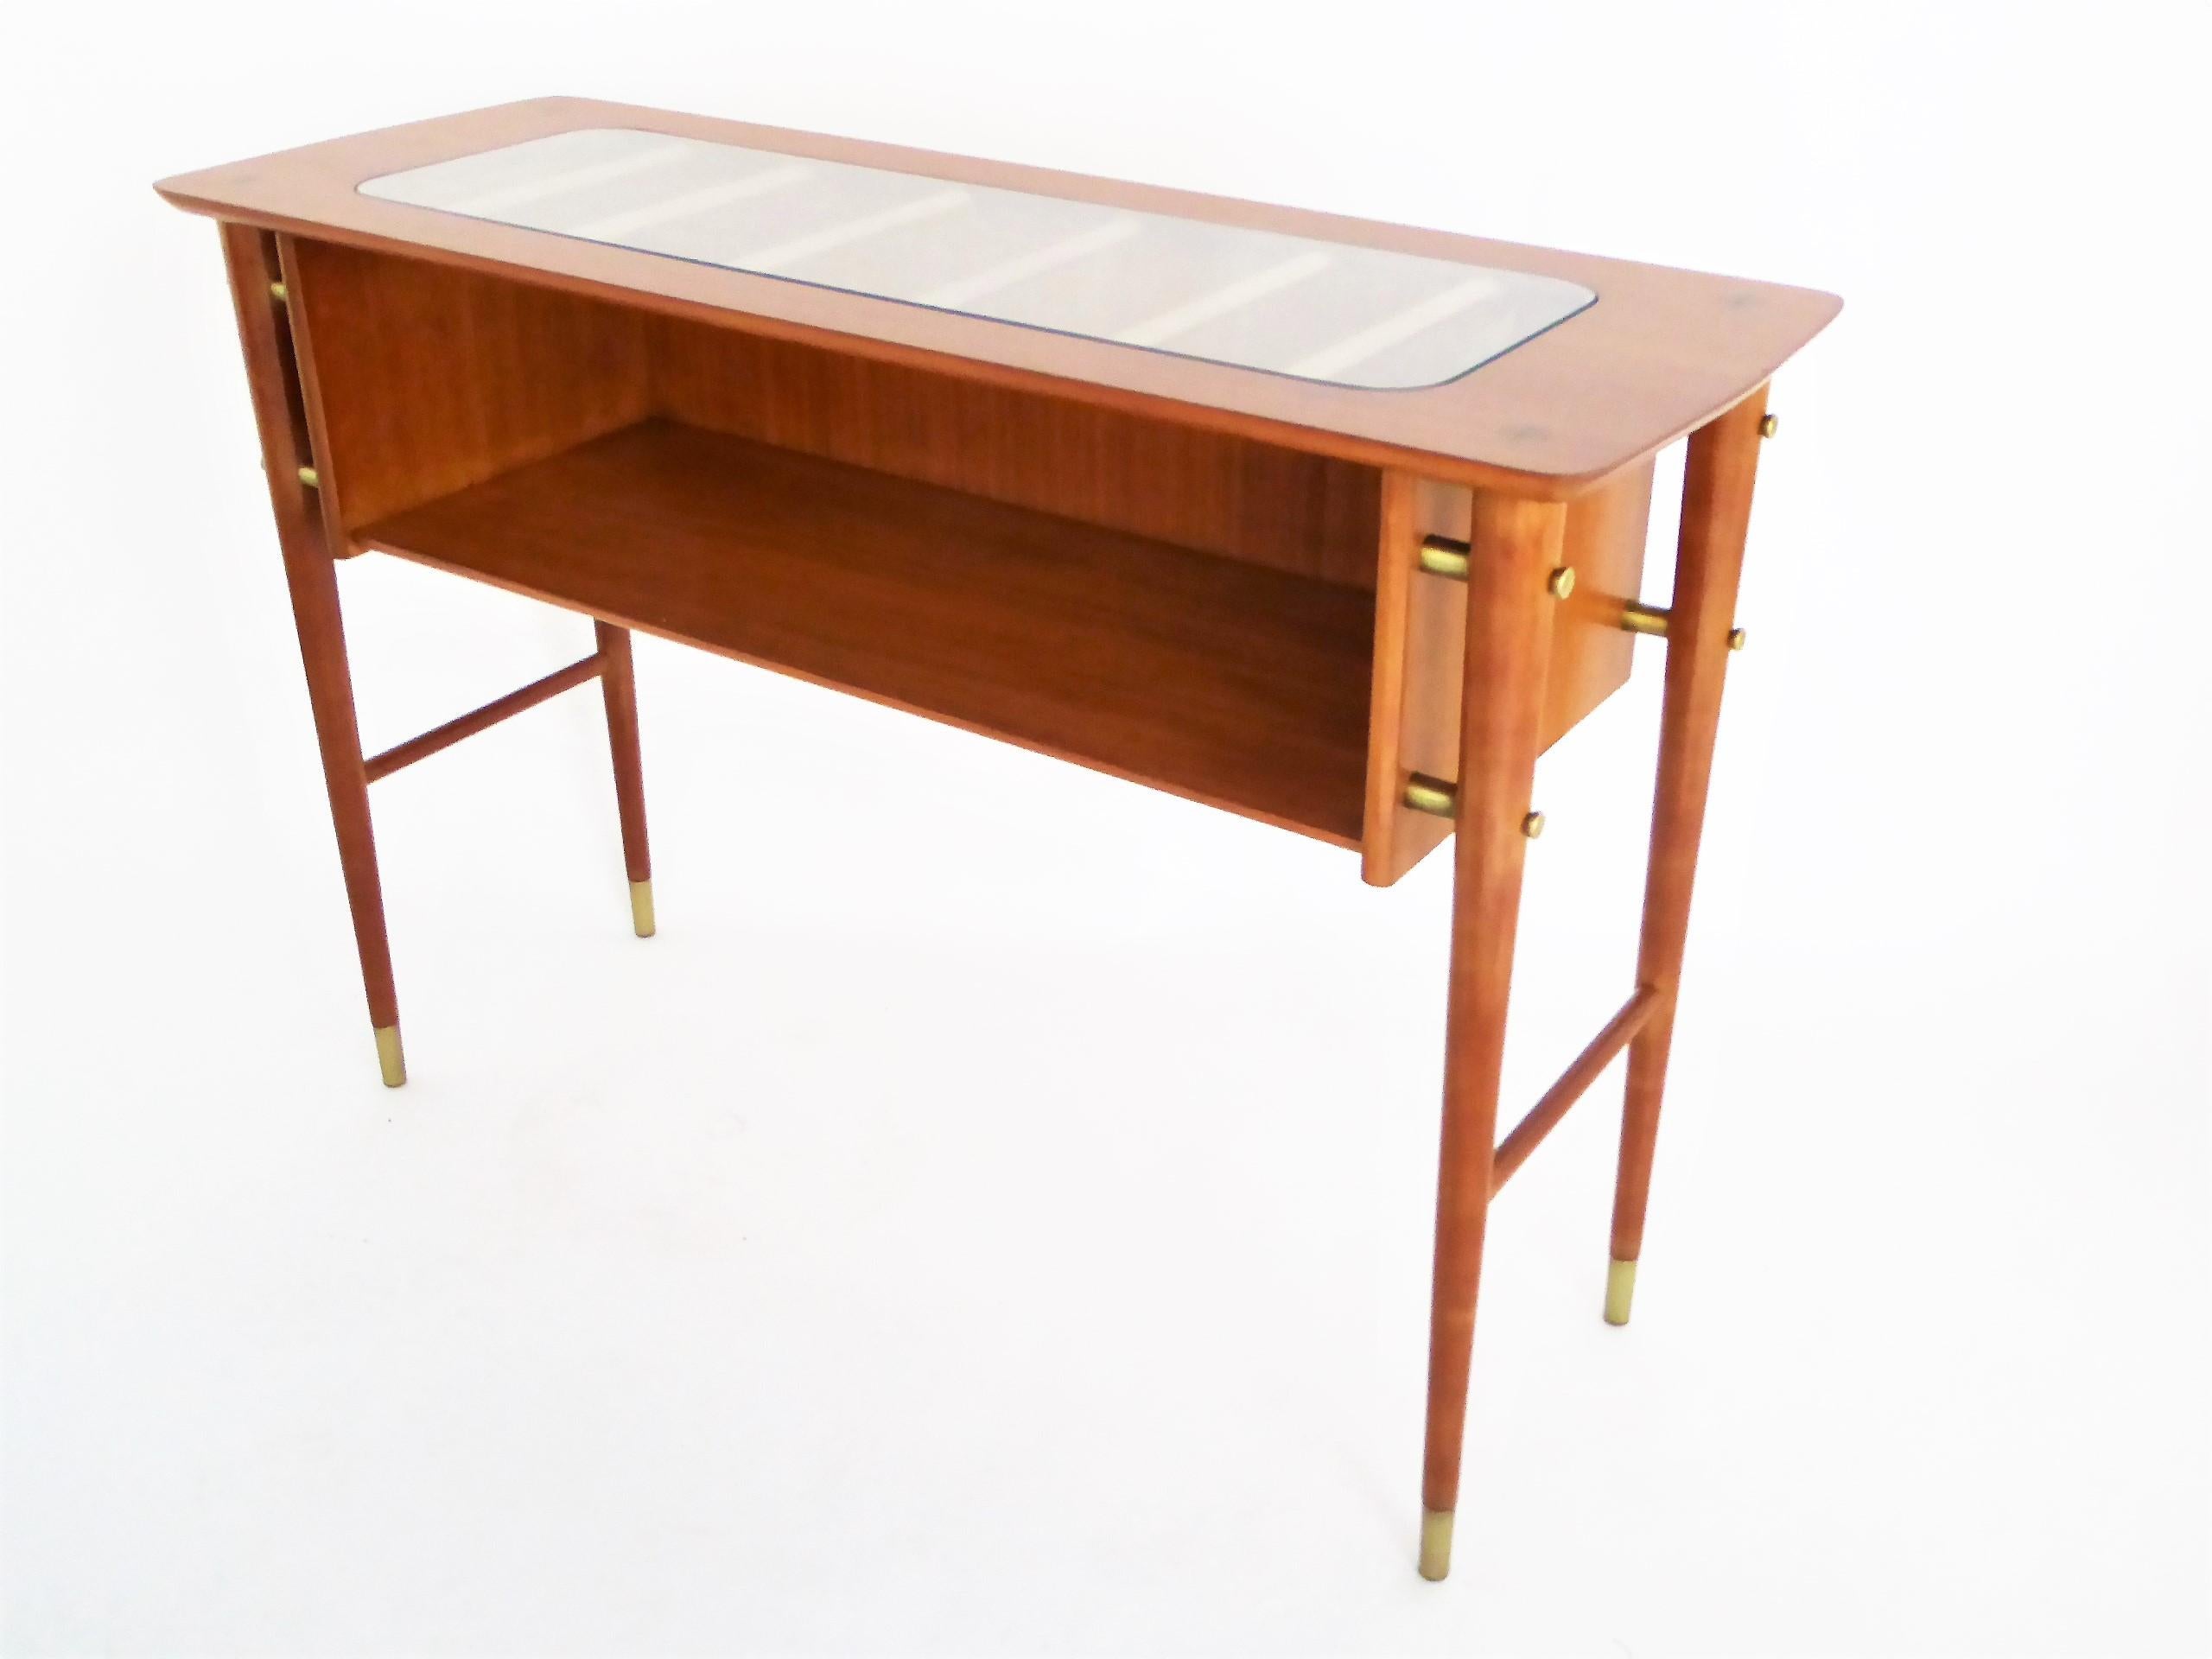 Italian 1950s Gio Ponti Style Petite Console Table with Shelf in Blond Mahogany